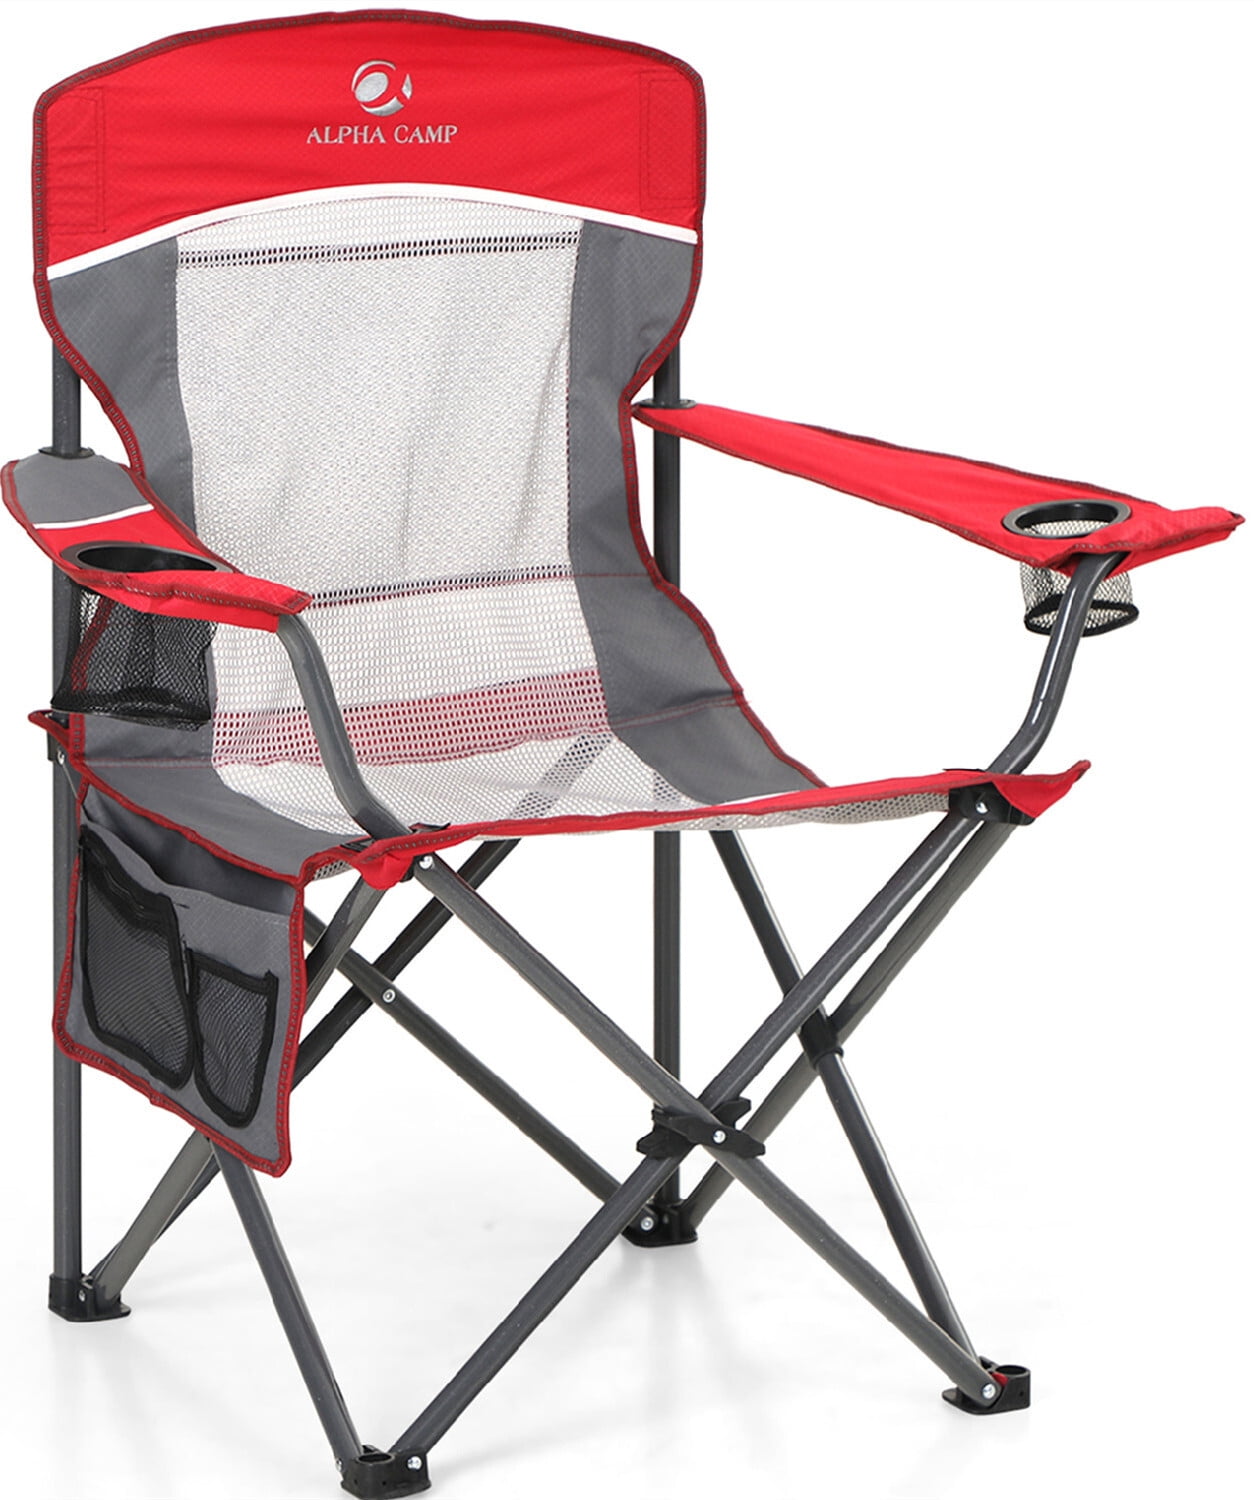 Alpha Camper Camping Chair Oversized Portable Folding Chair Heavy-Duty  Steel Frame Mesh Chair with Cup Holder Suitable for Outdoor Fishing Camping,  Red 